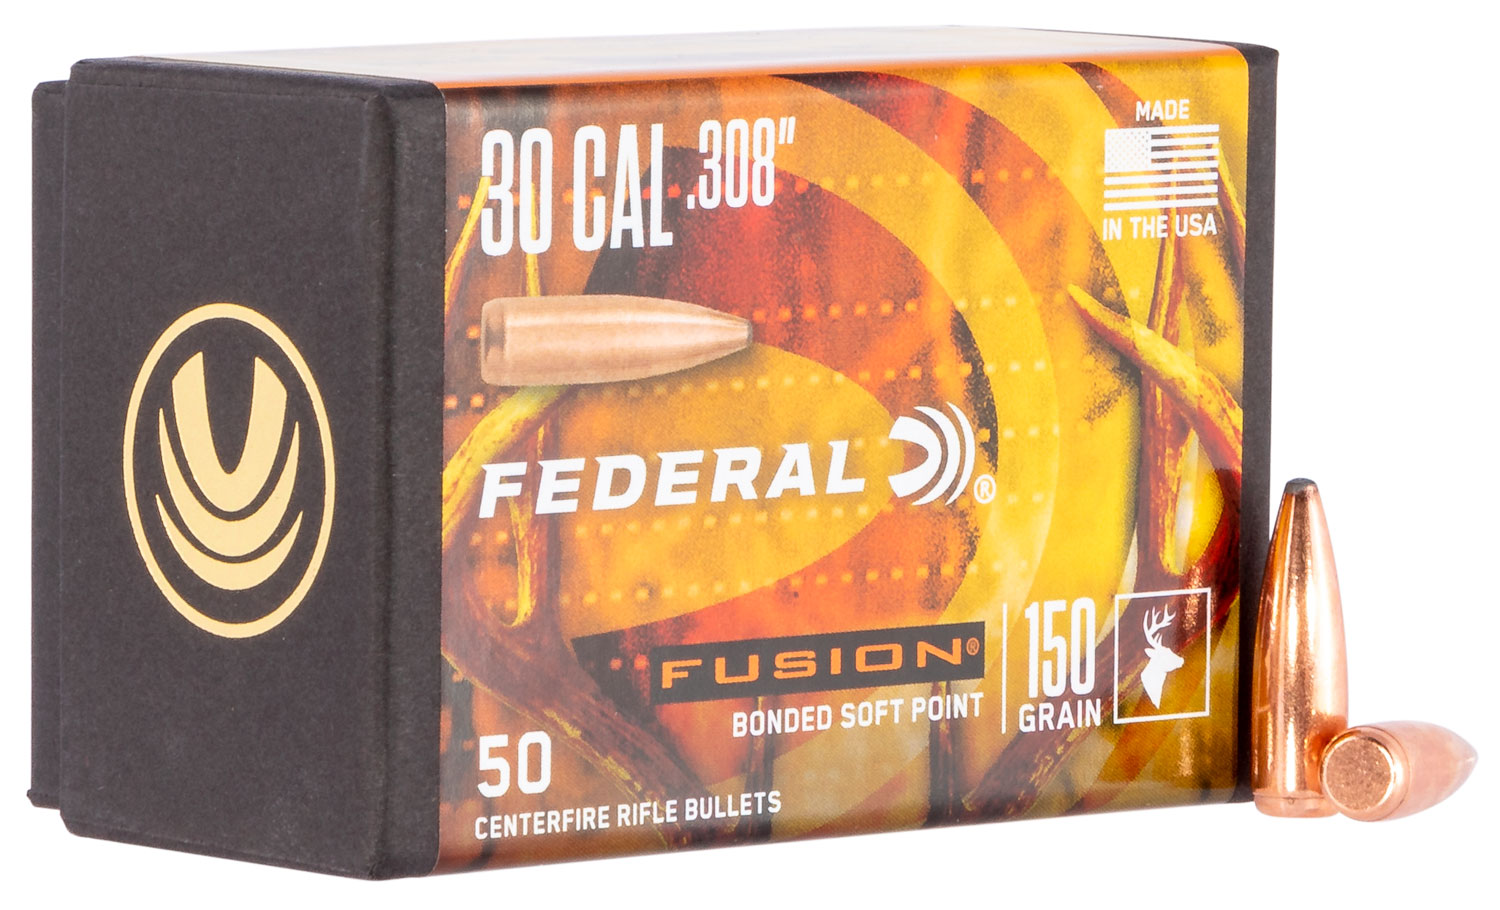 Federal FB308F1 Fusion Component  30 Cal .308 150 gr Fusion Soft Point